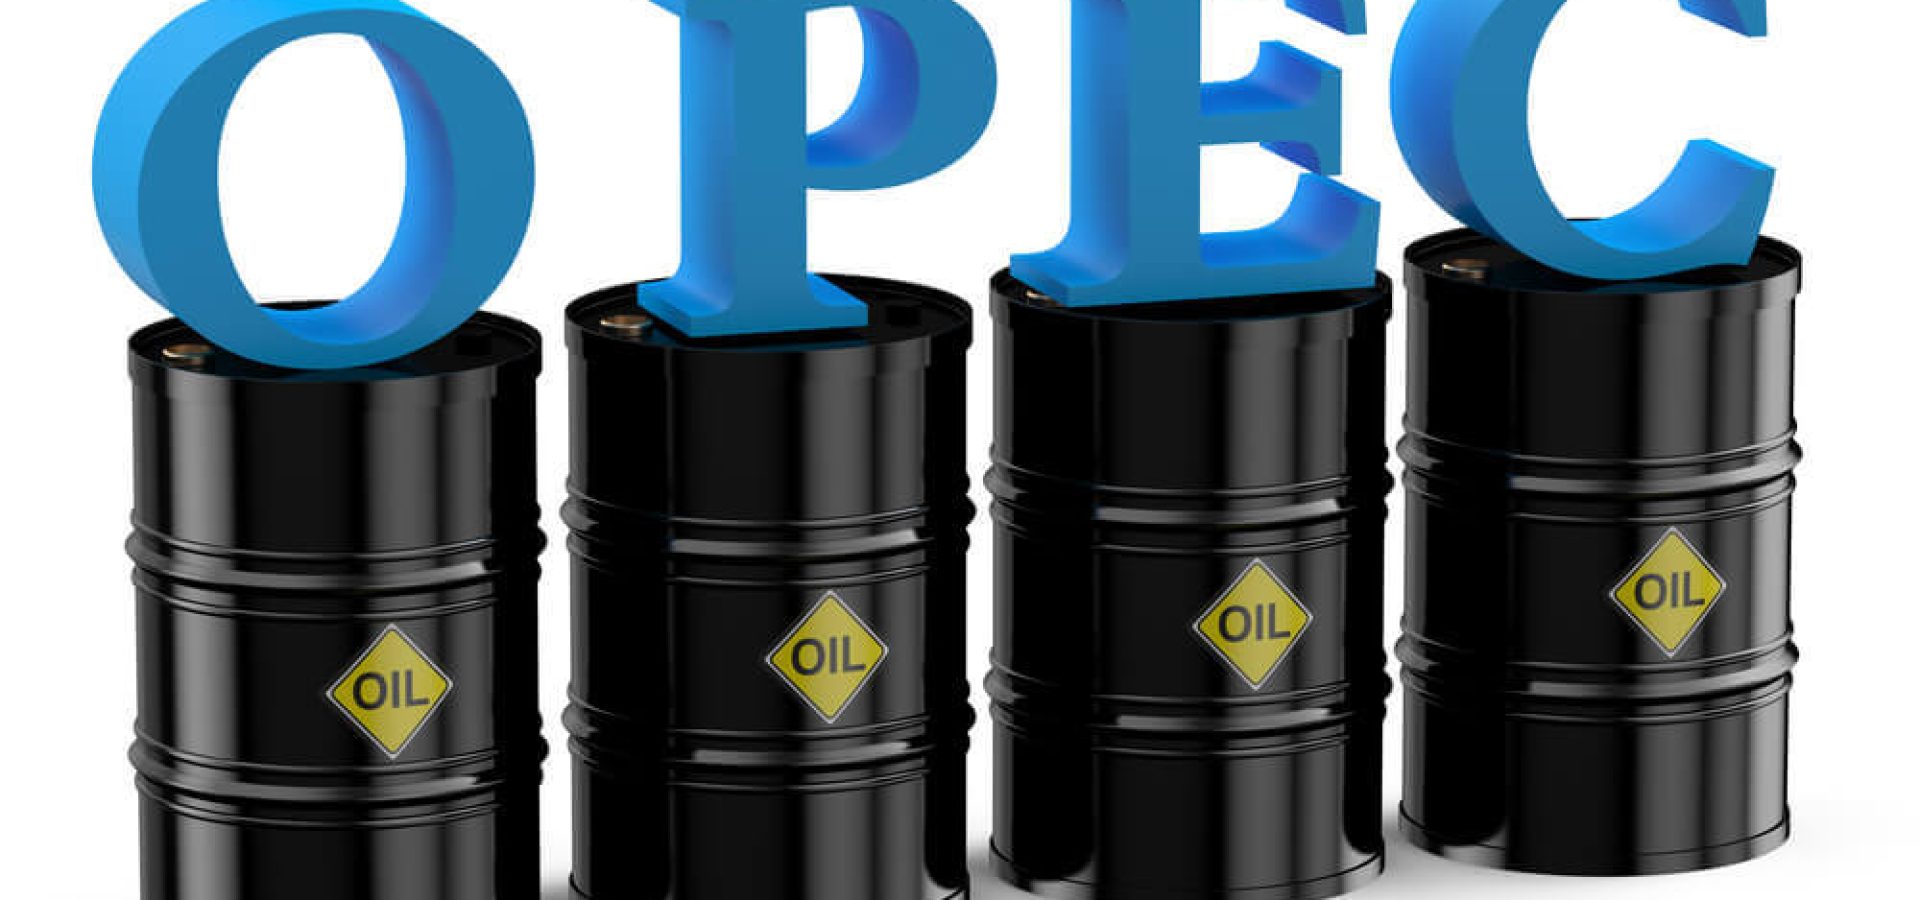 OPEC+ to Discuss Extending Oil Cuts/ Slowly Raising Output